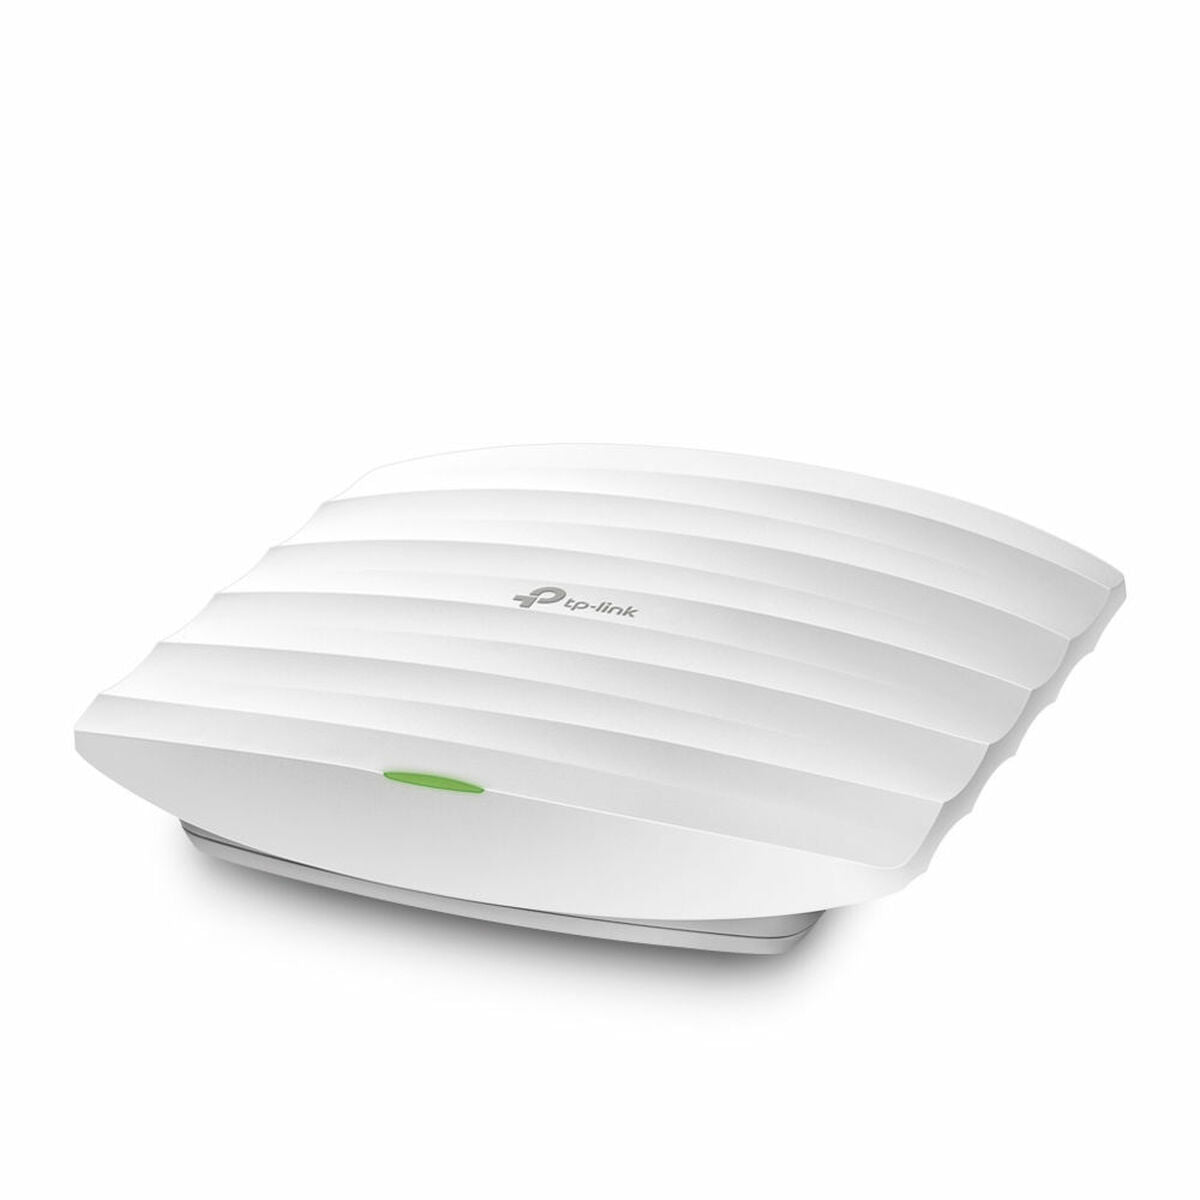 Access point TP-Link EAP265 HD AC1750 2.4/5 GHz, TP-Link, Computing, Network devices, access-point-tp-link-eap265-hd-ac1750-2-4-5-ghz, Brand_TP-Link, category-reference-2609, category-reference-2803, category-reference-2820, category-reference-t-19685, category-reference-t-19914, Condition_NEW, networks/wiring, Price_100 - 200, Teleworking, RiotNook